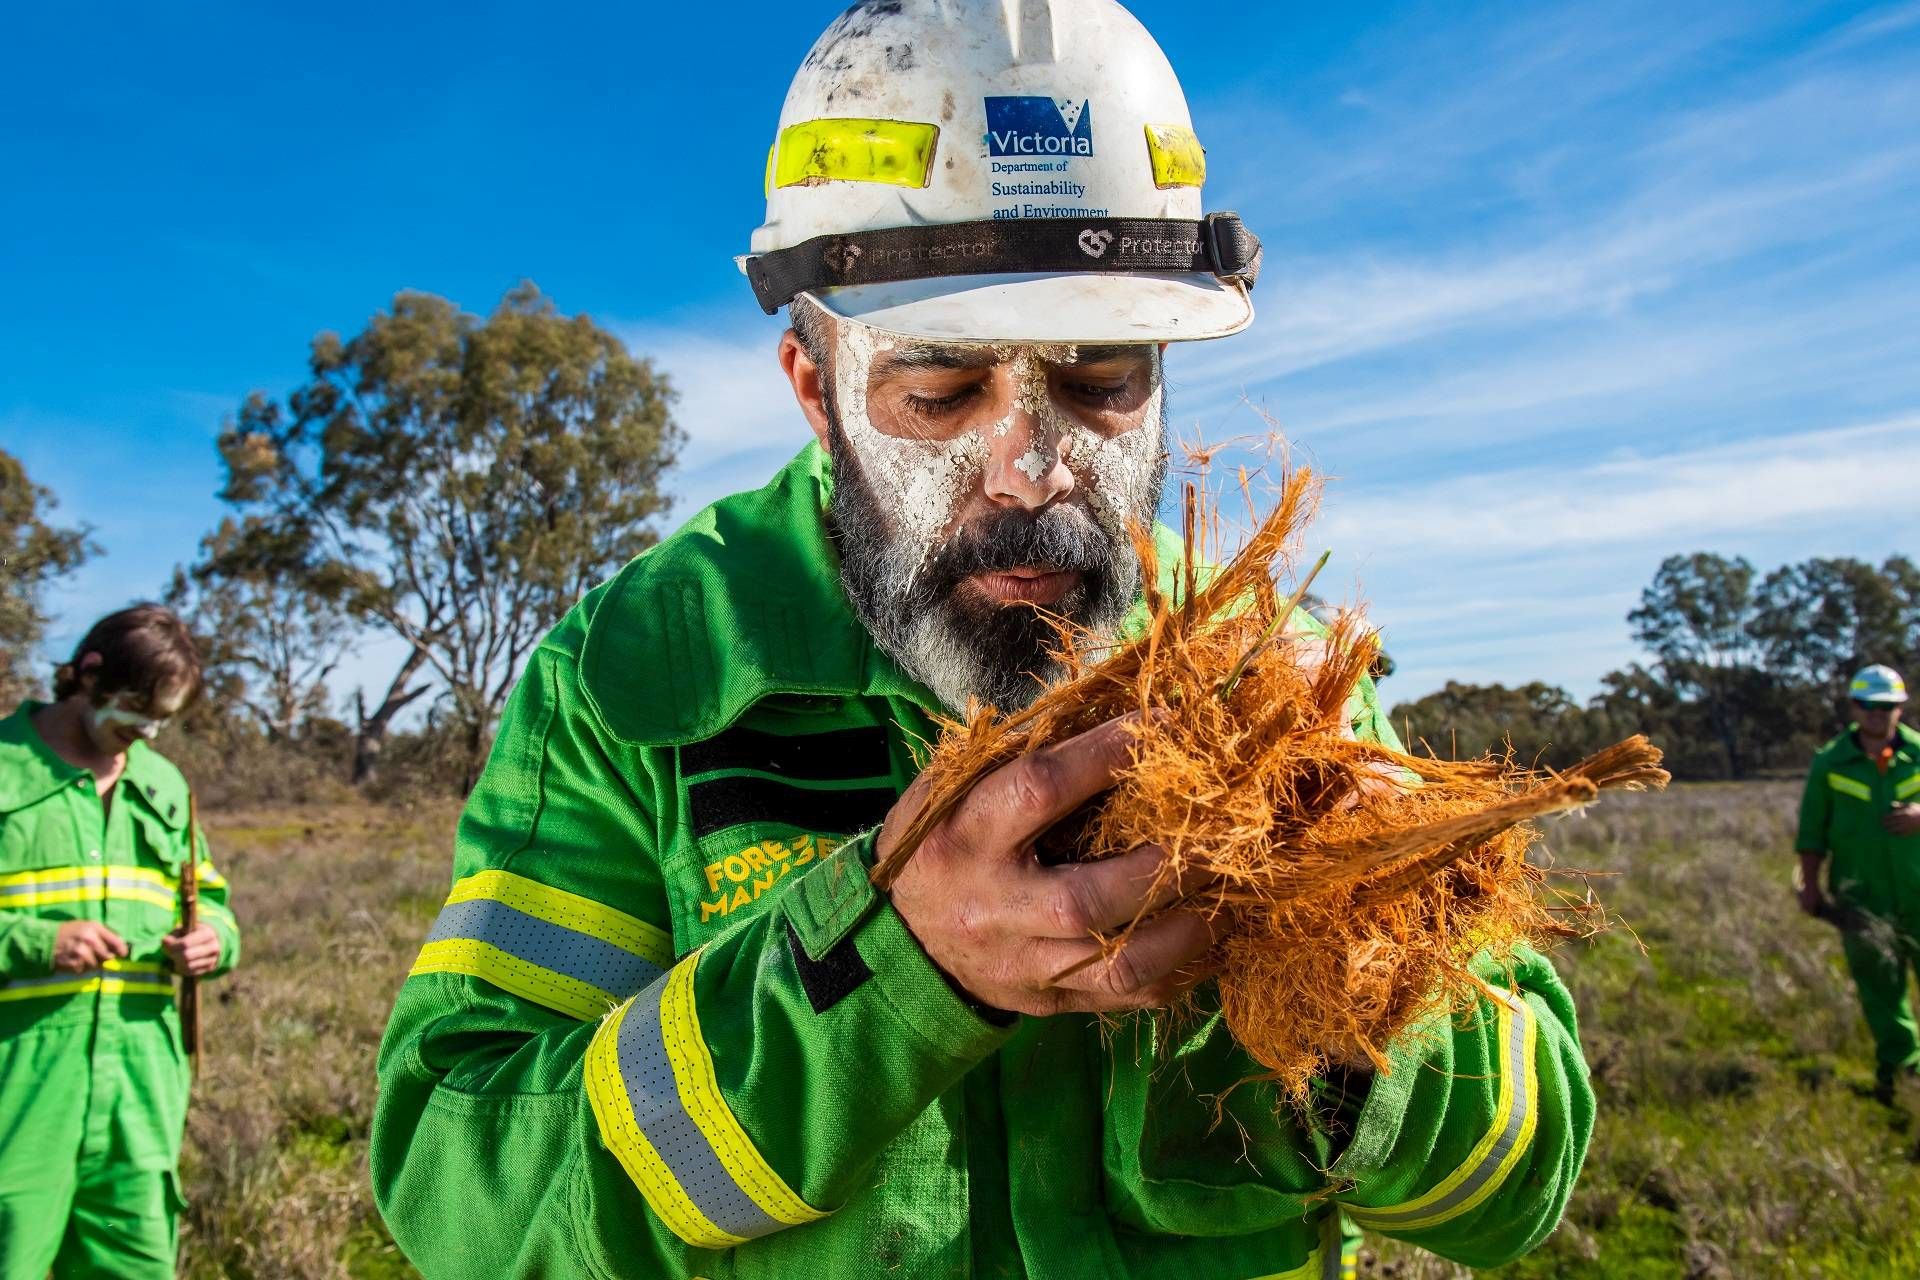 Man wearing a hard hat and green overalls is blowing on brown husks to try and create fire.